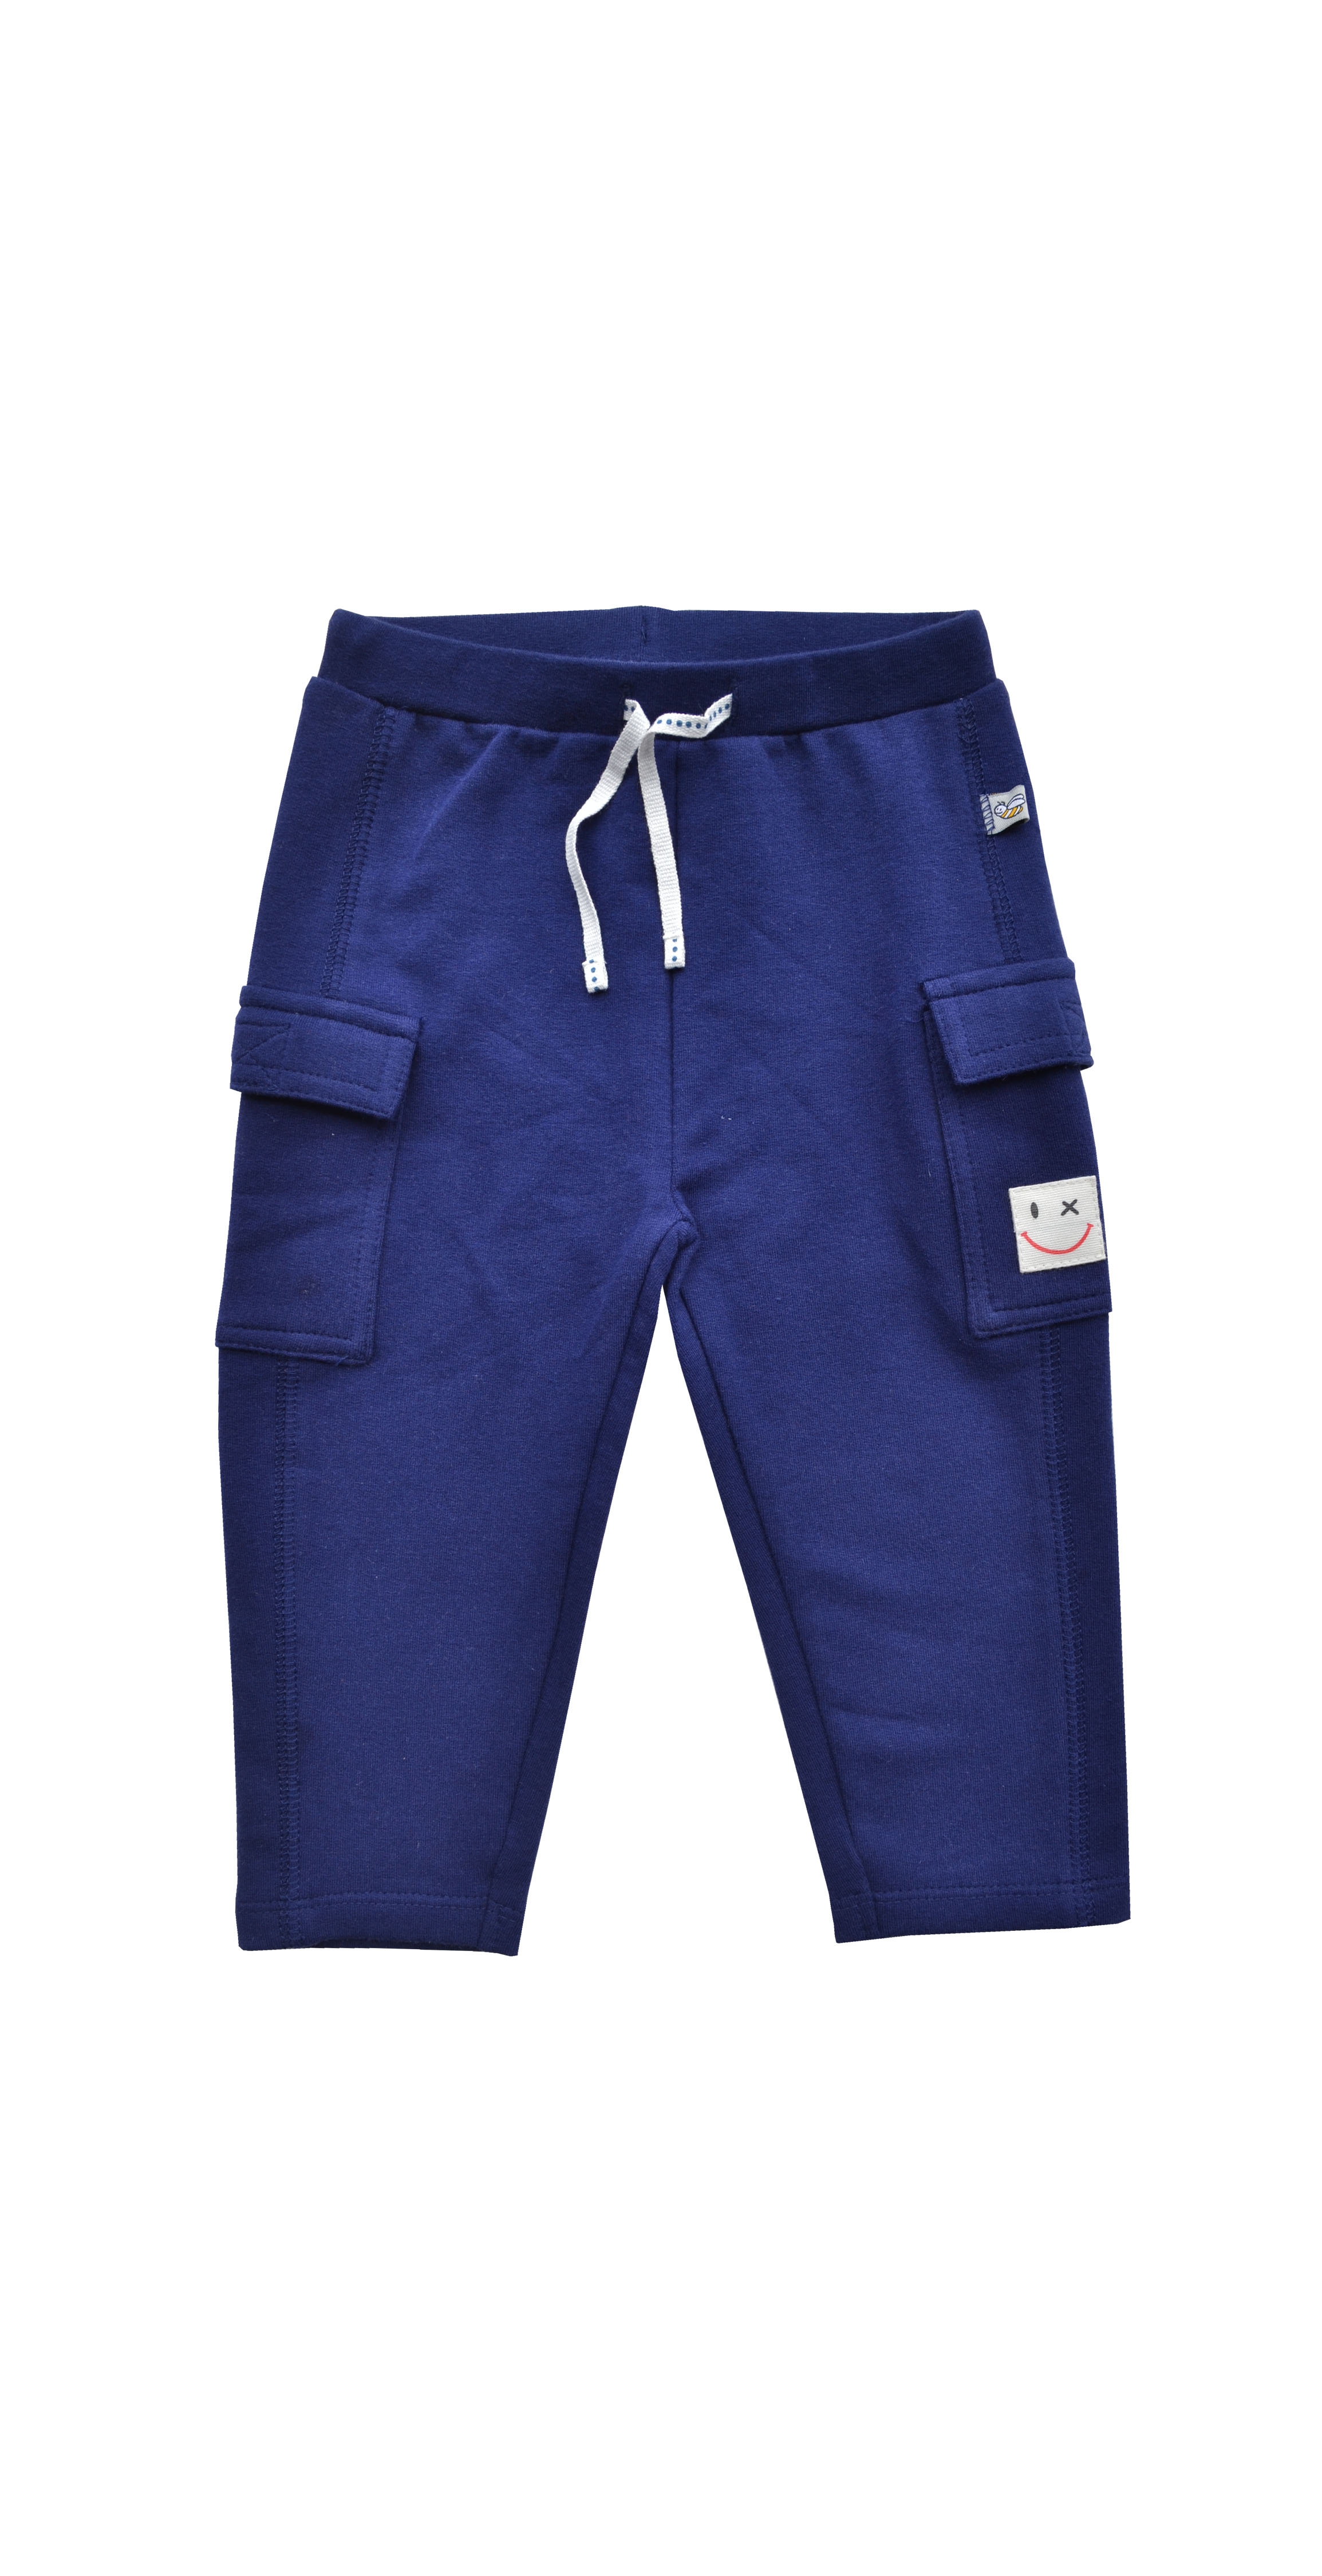 Babeez | Navy Pant with Cord at Waistband (100% Cotton Unbrushed Fleece) undefined